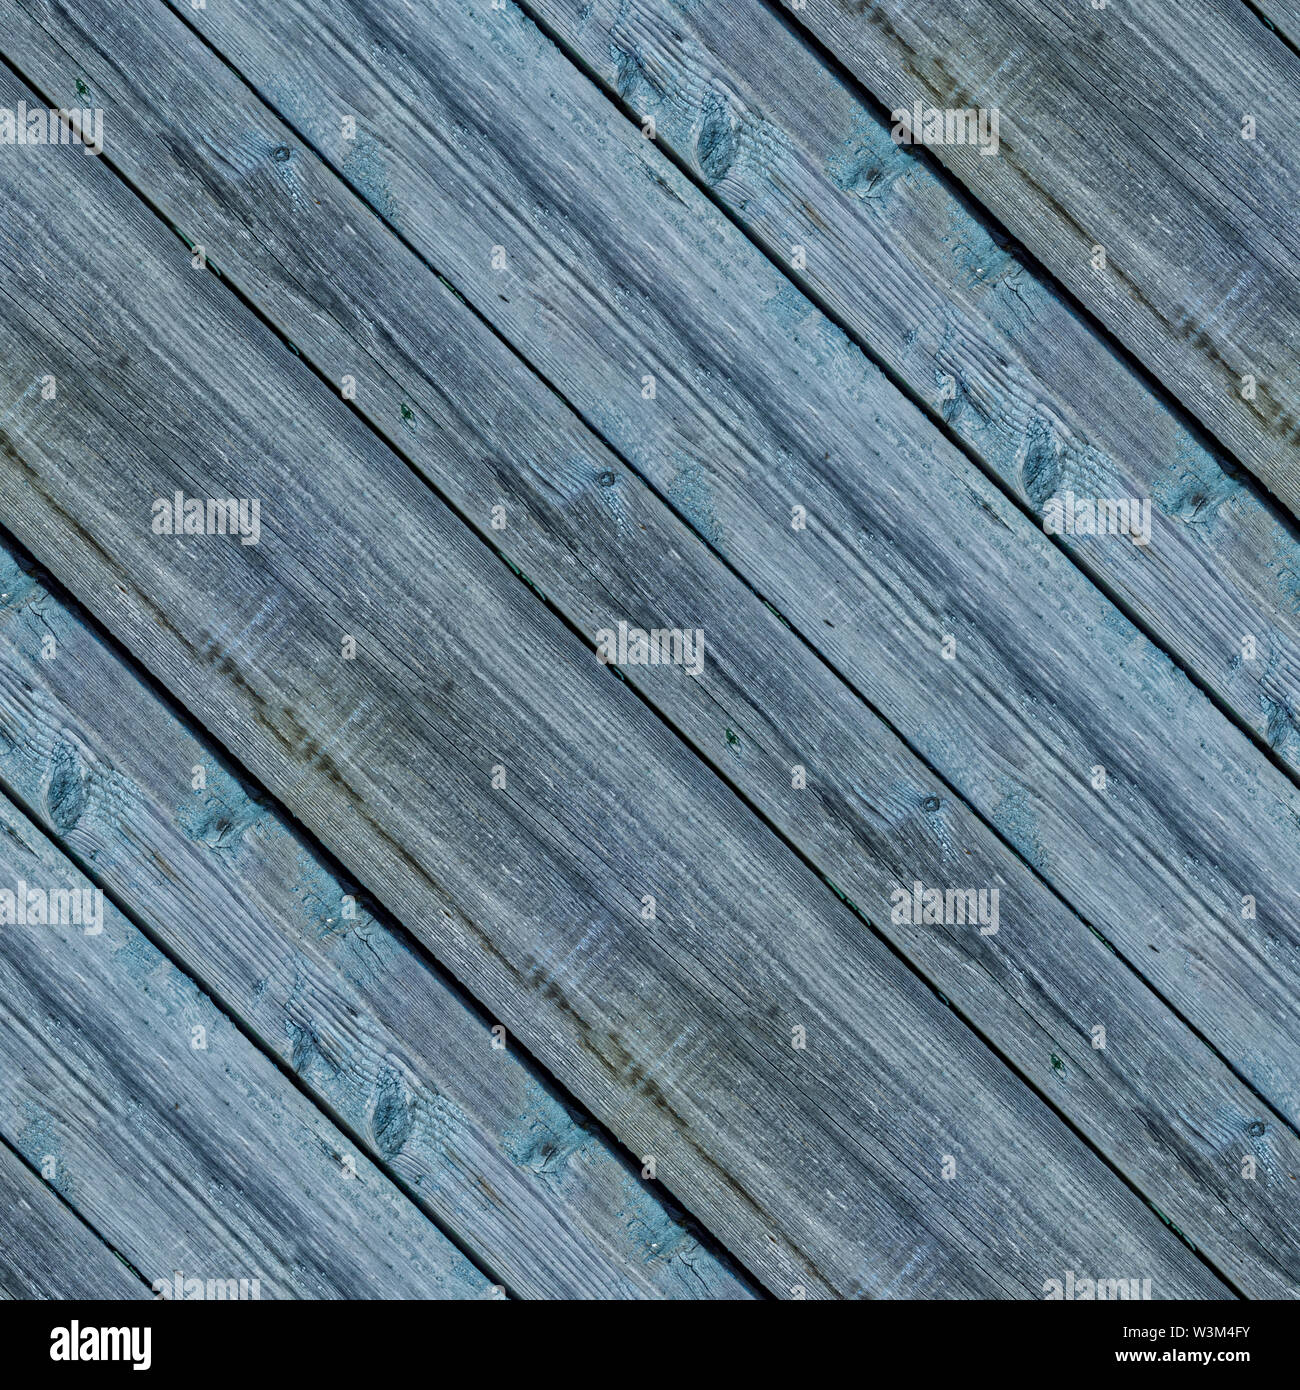 Abstract Seamless Texture For Designers With Blue And Grey Decks